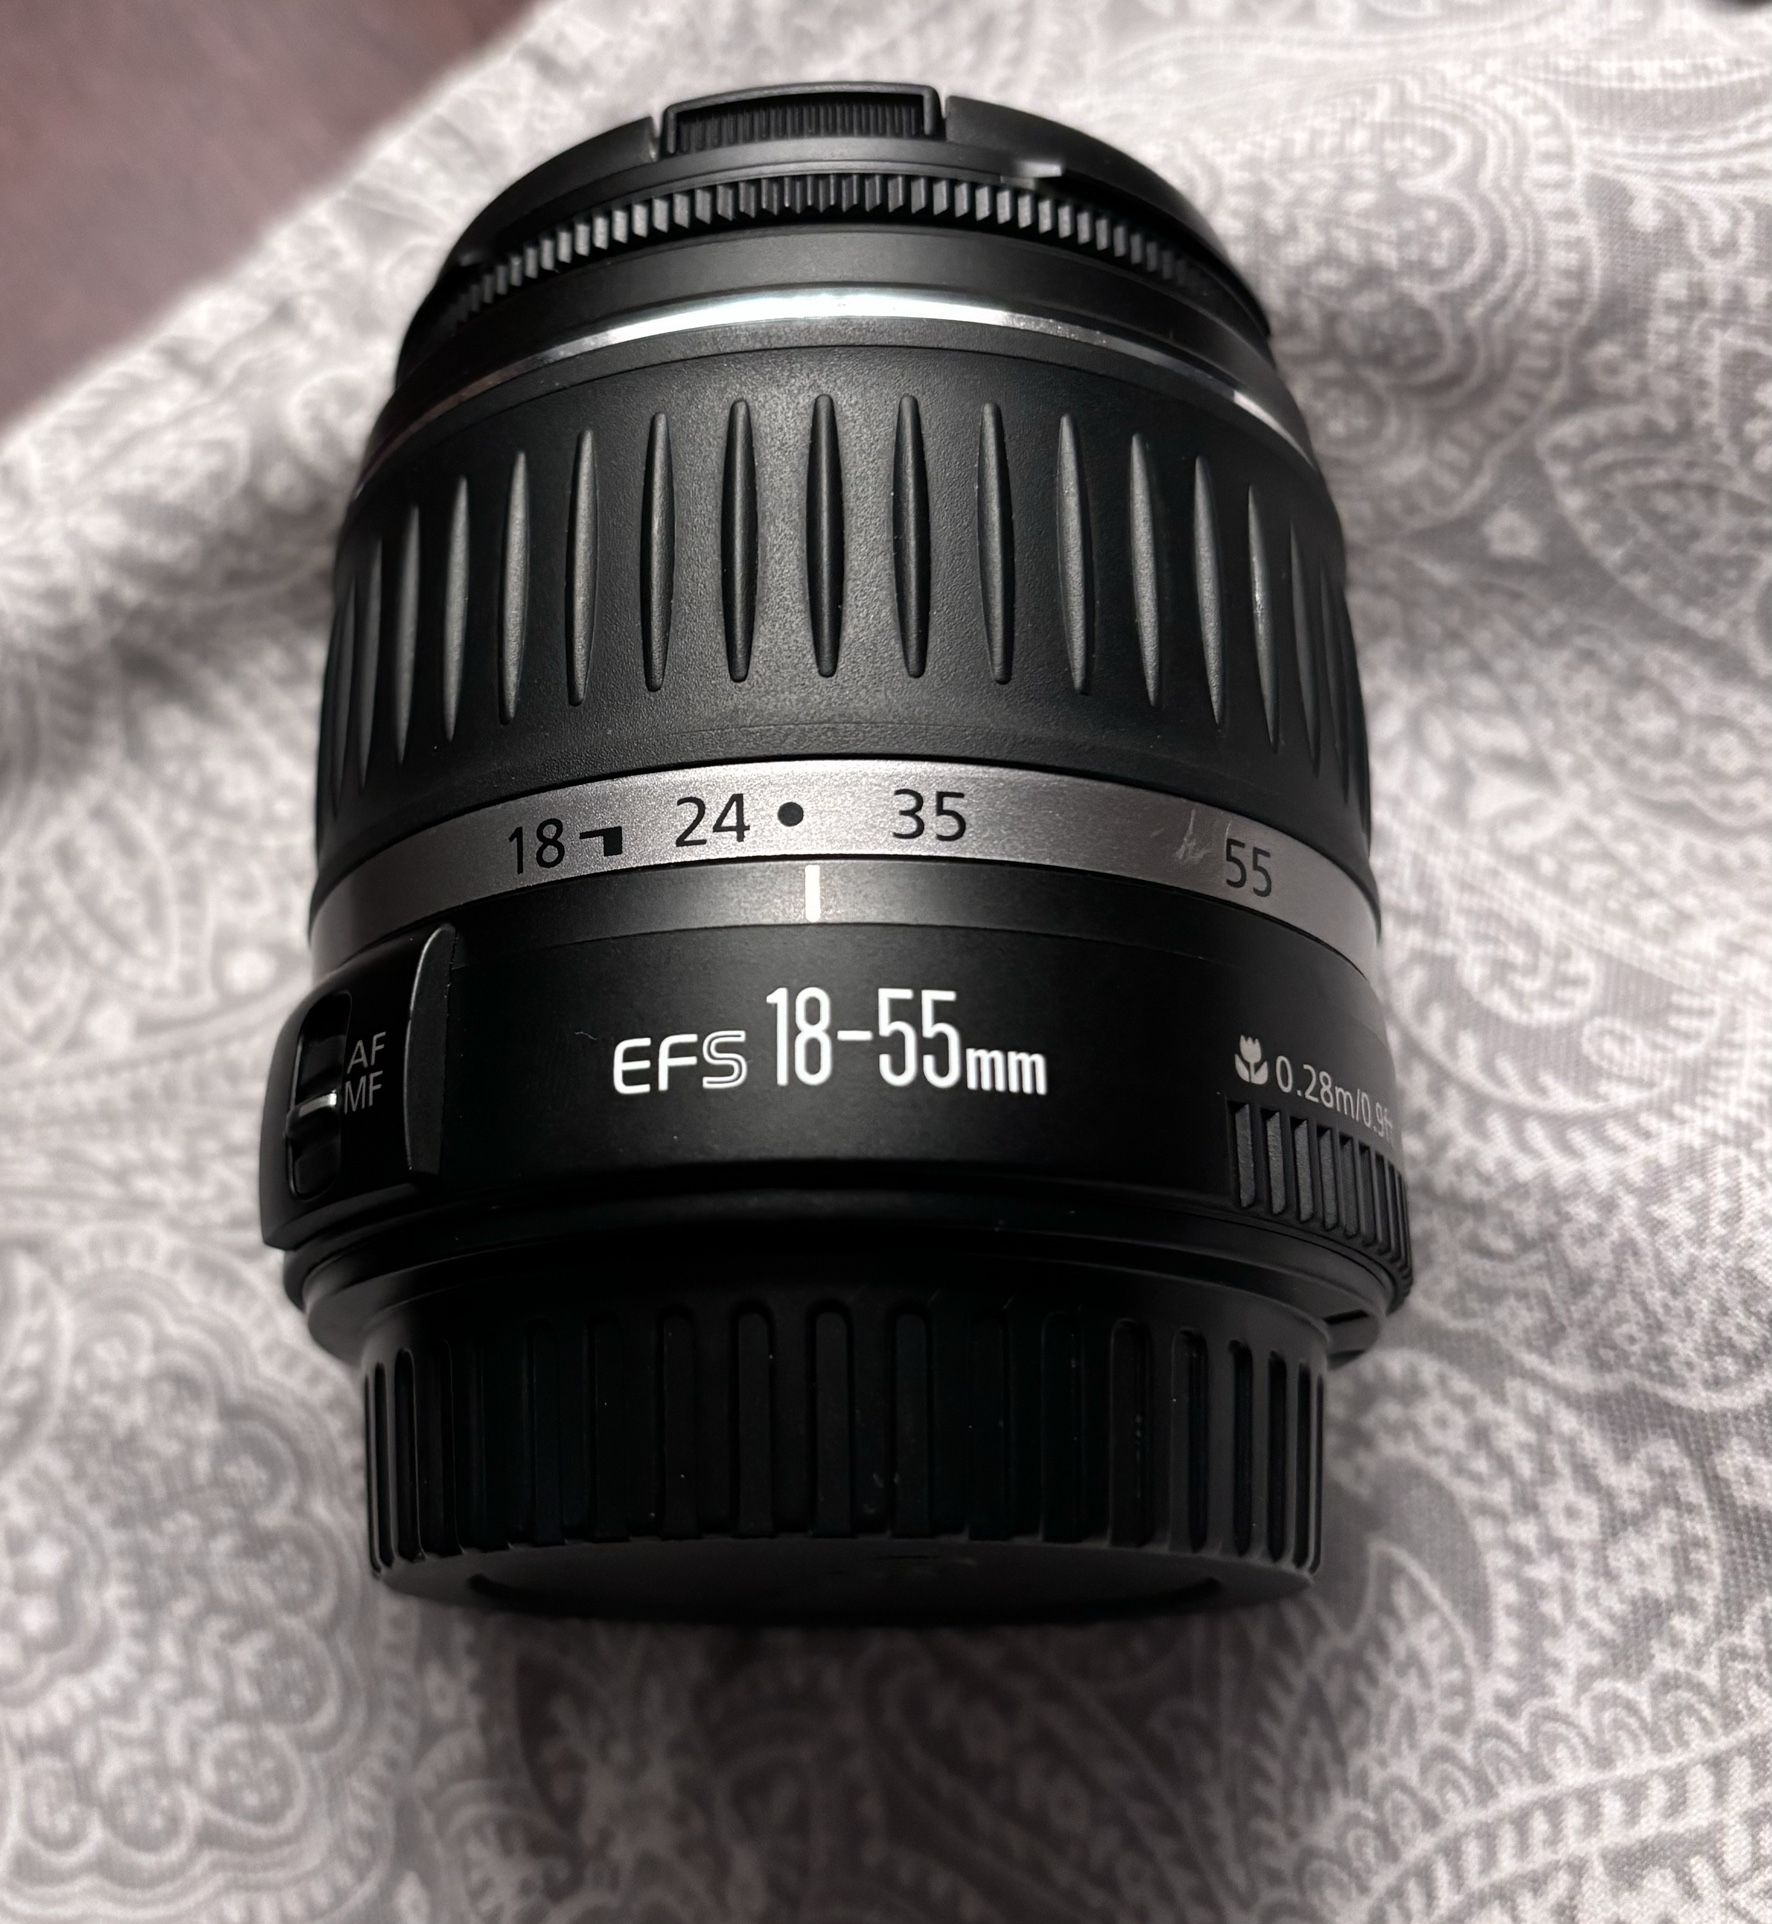 Canon EF-S 18-55mm f/3.5-5.6 IS STM Zoom Lens